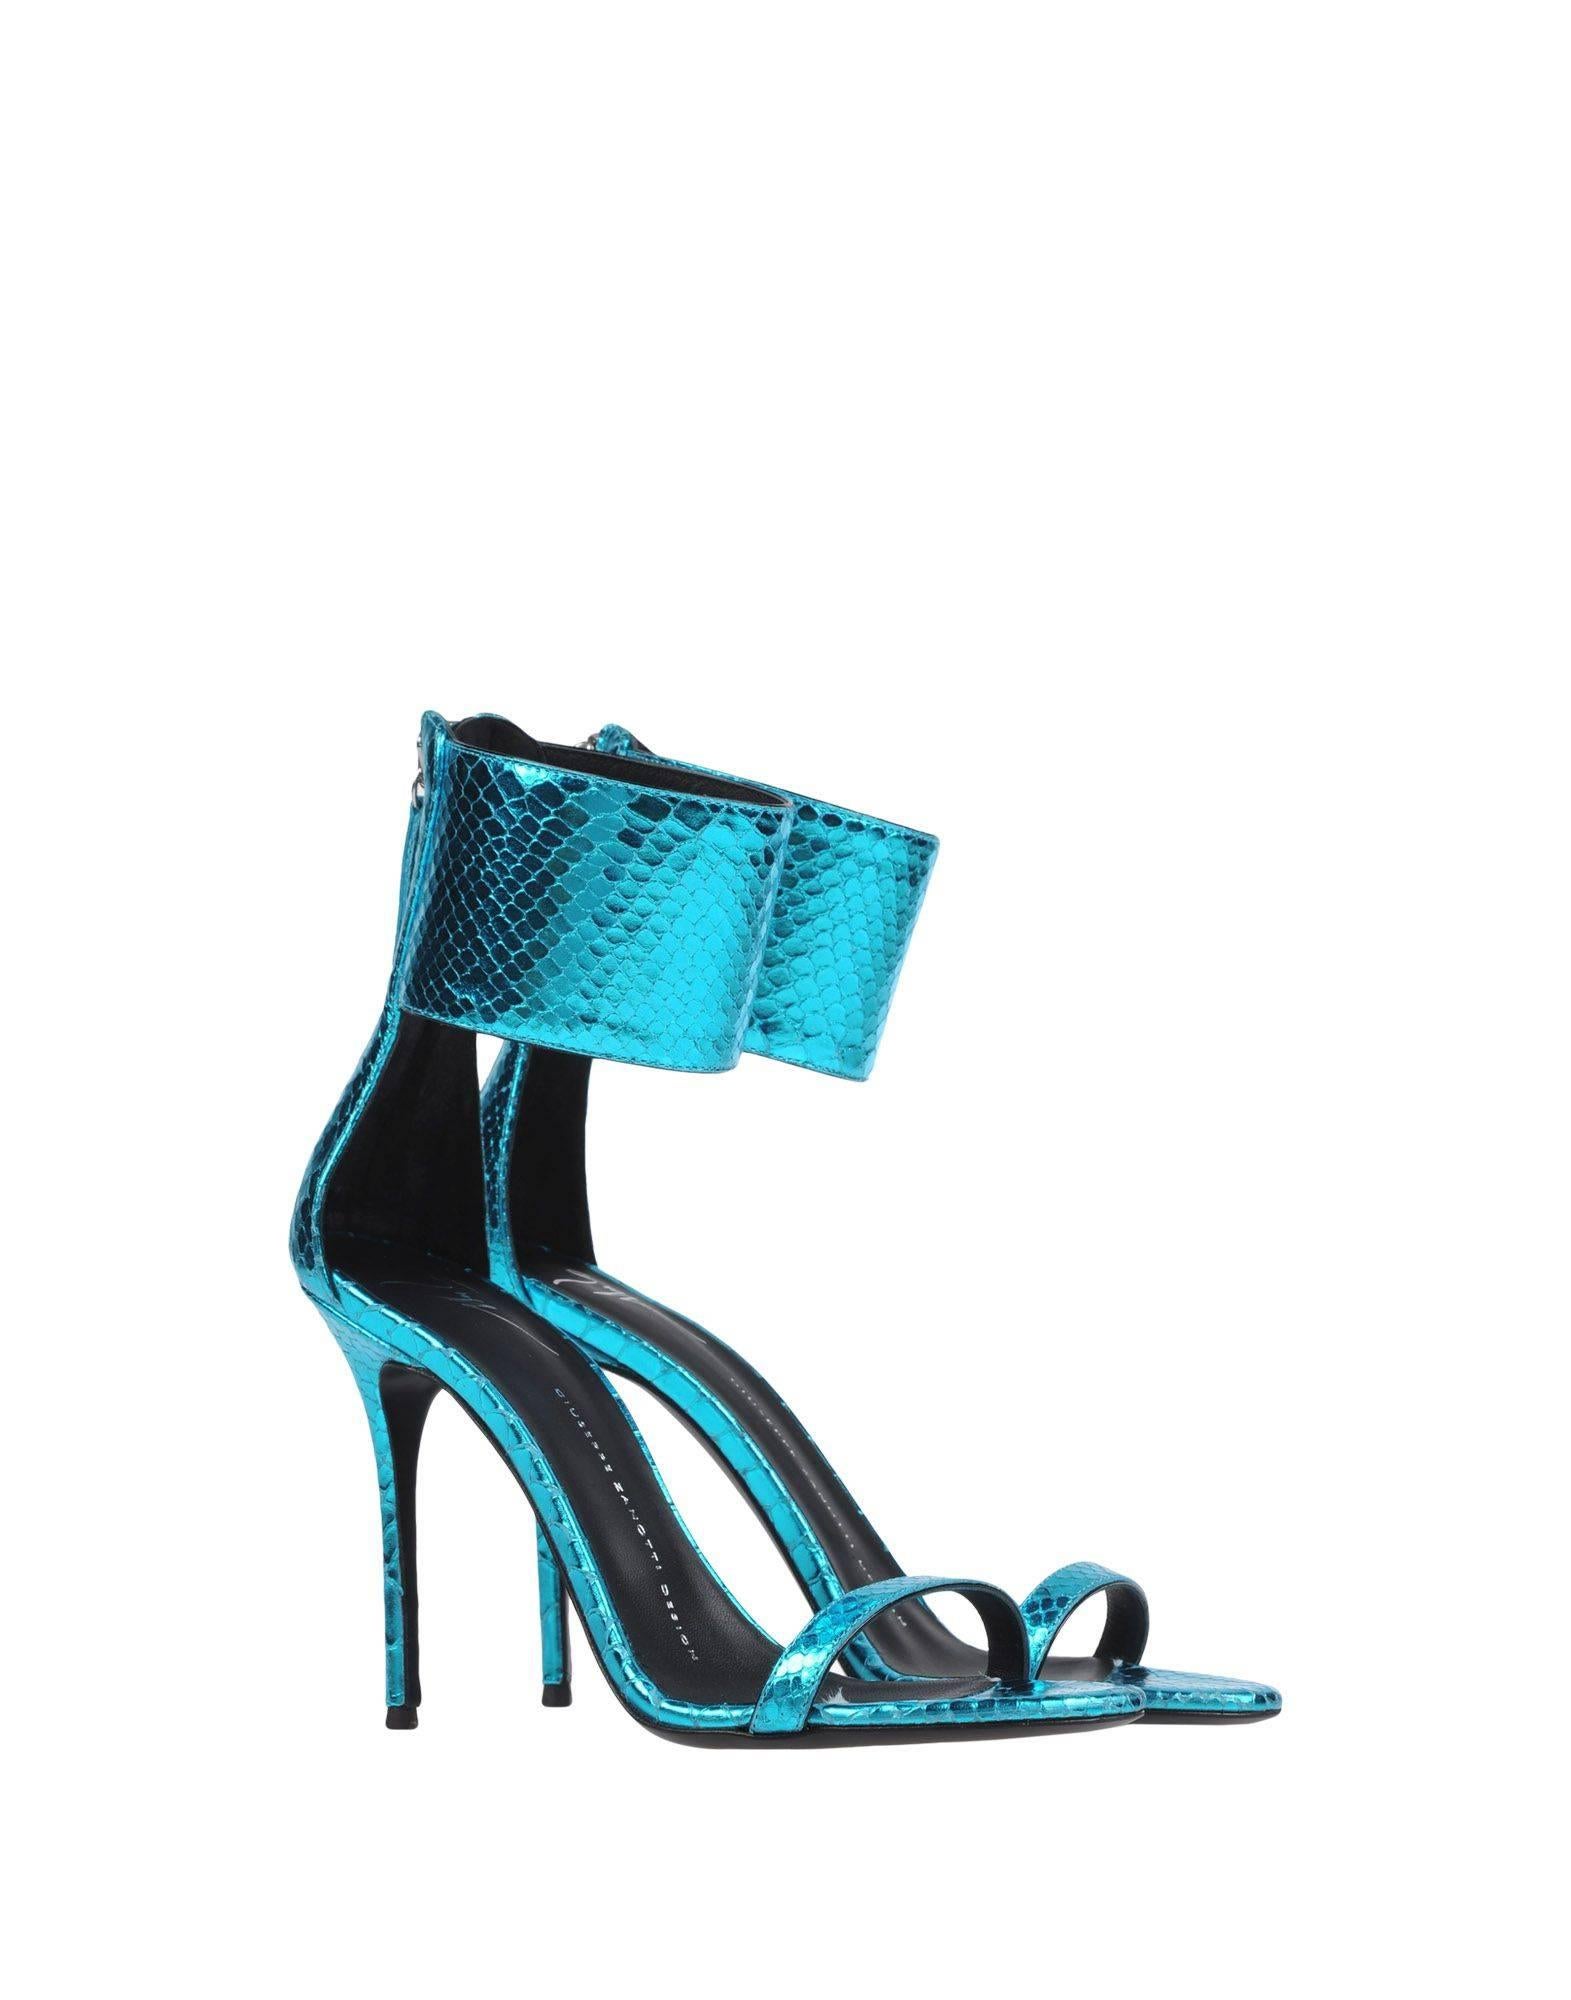 CURATOR'S NOTES

Giuseppe Zanotti New Teal Metallic Snake Leather Evening Sandals Heels in Box 

Size IT 36
Leather
Zipper closure
Made in Italy
Heel height 4